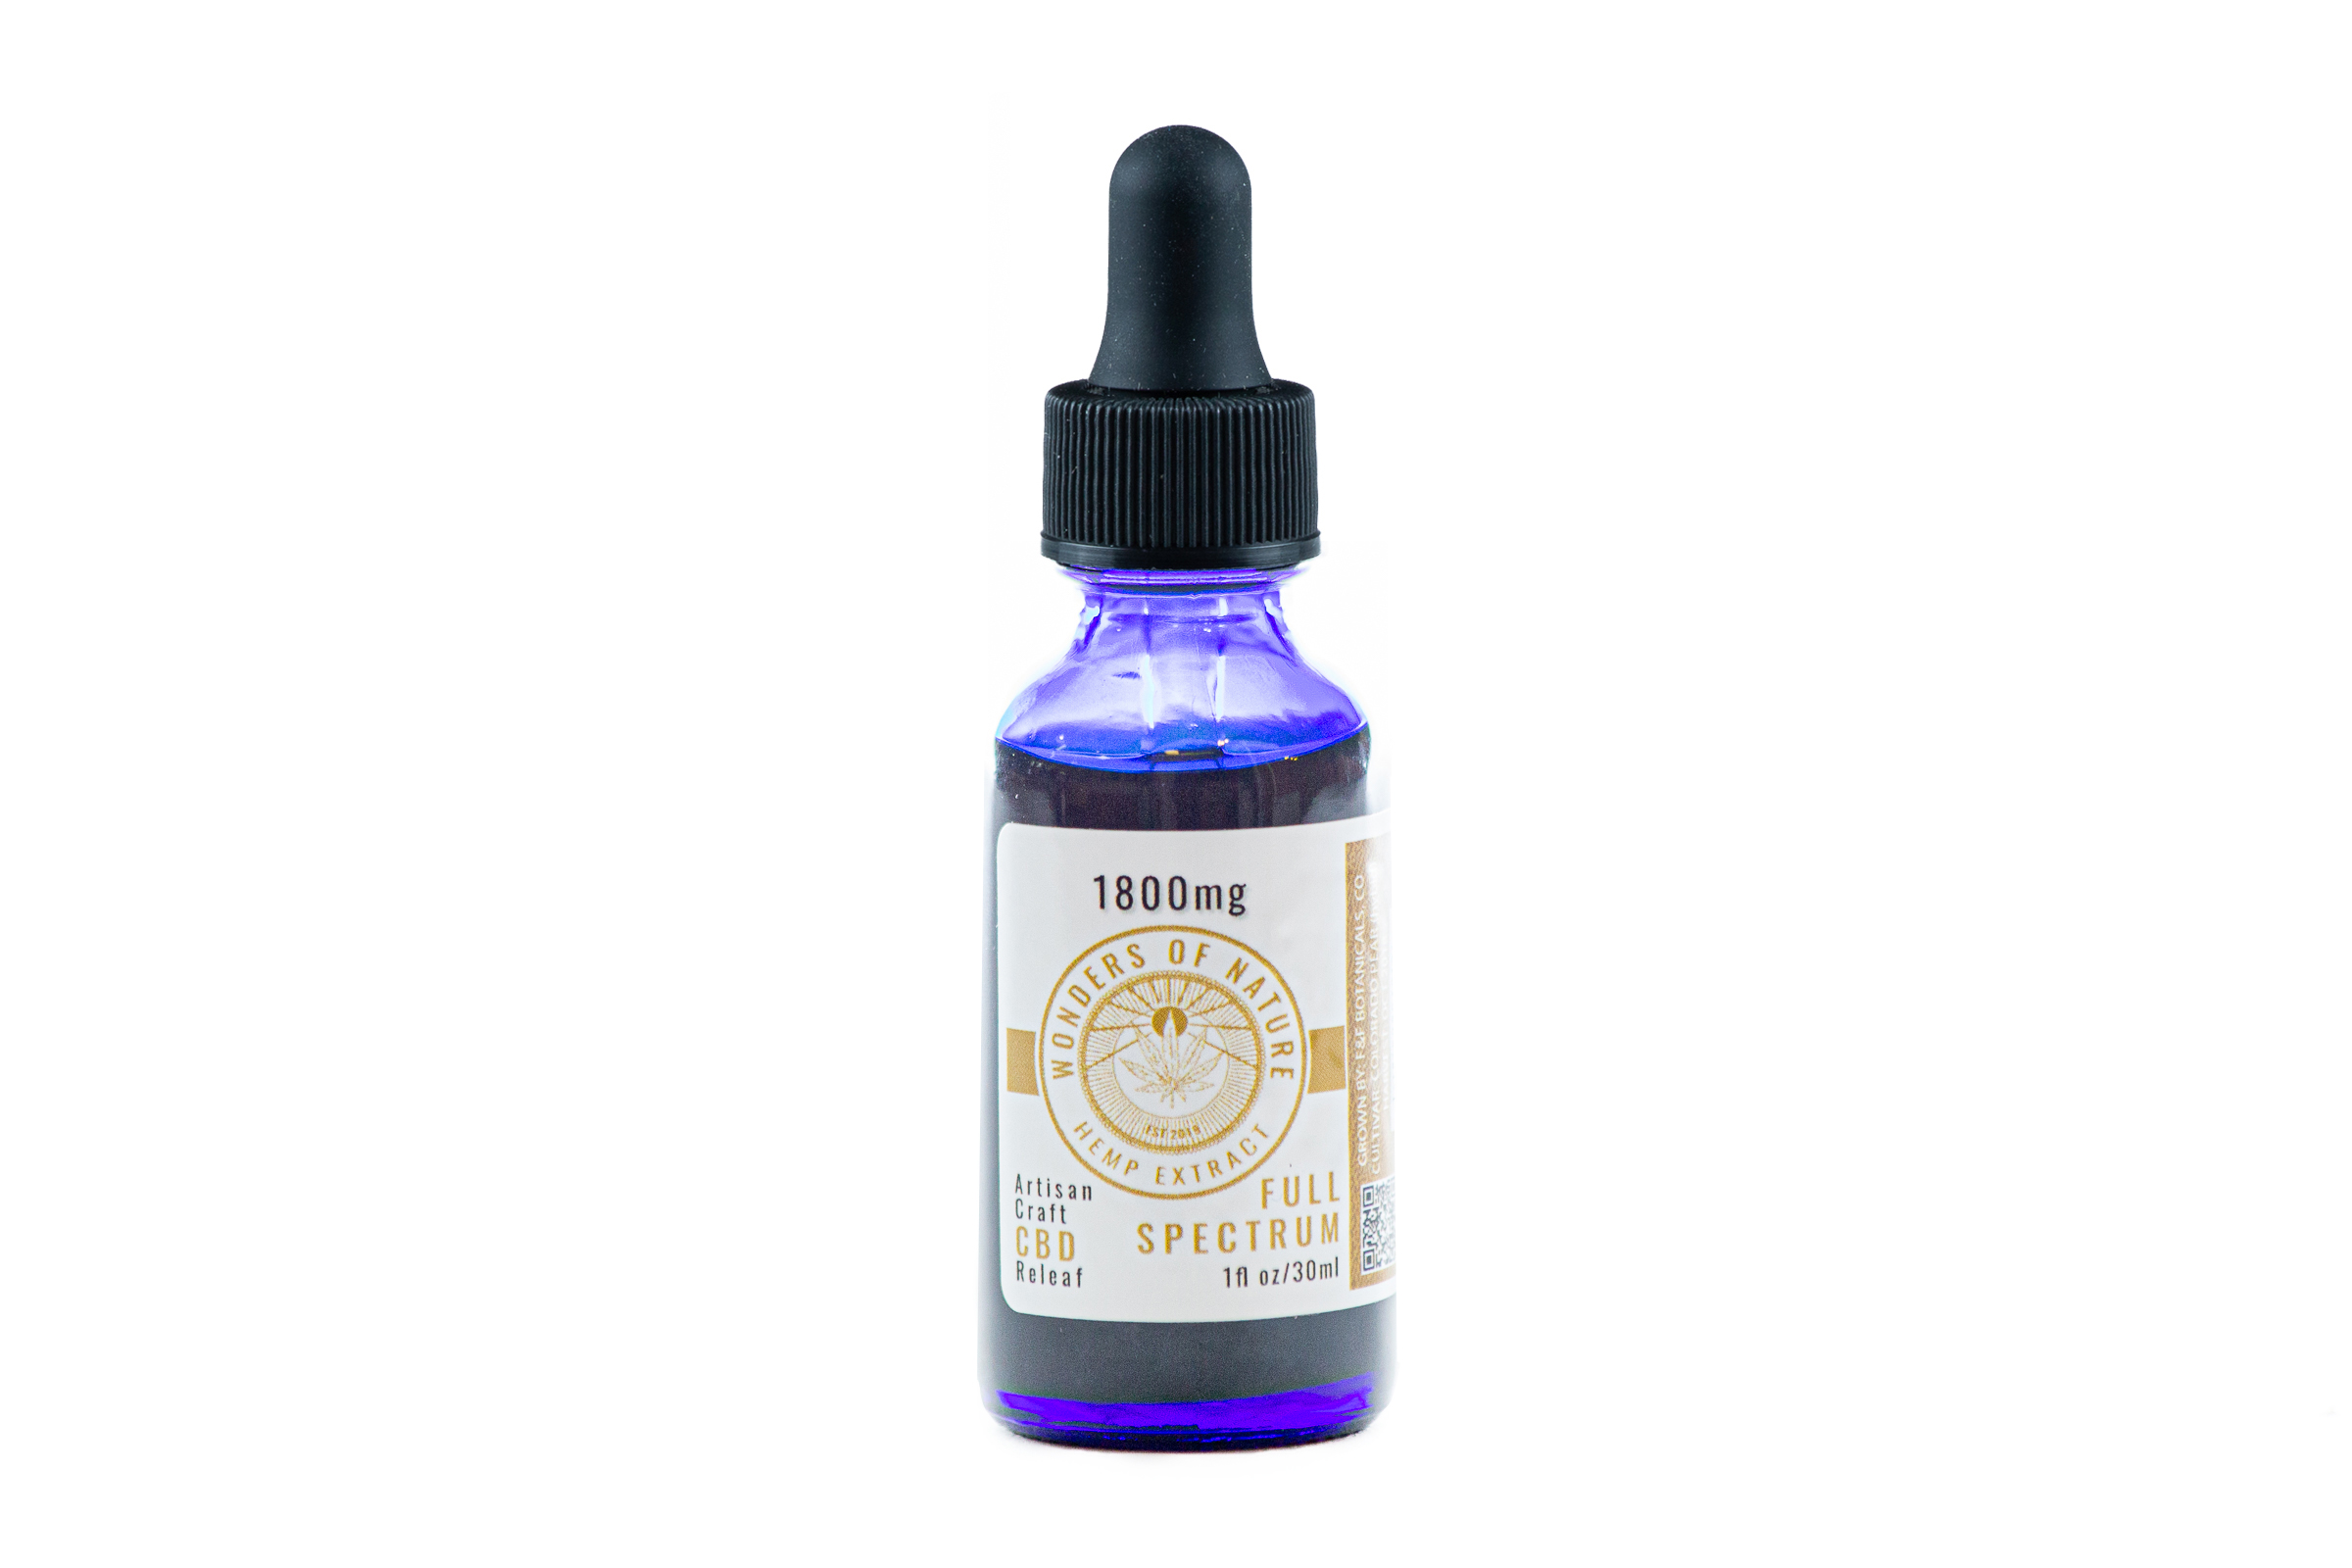 Wonders of Nature – Premium Hemp and CBD products sourced from small ...